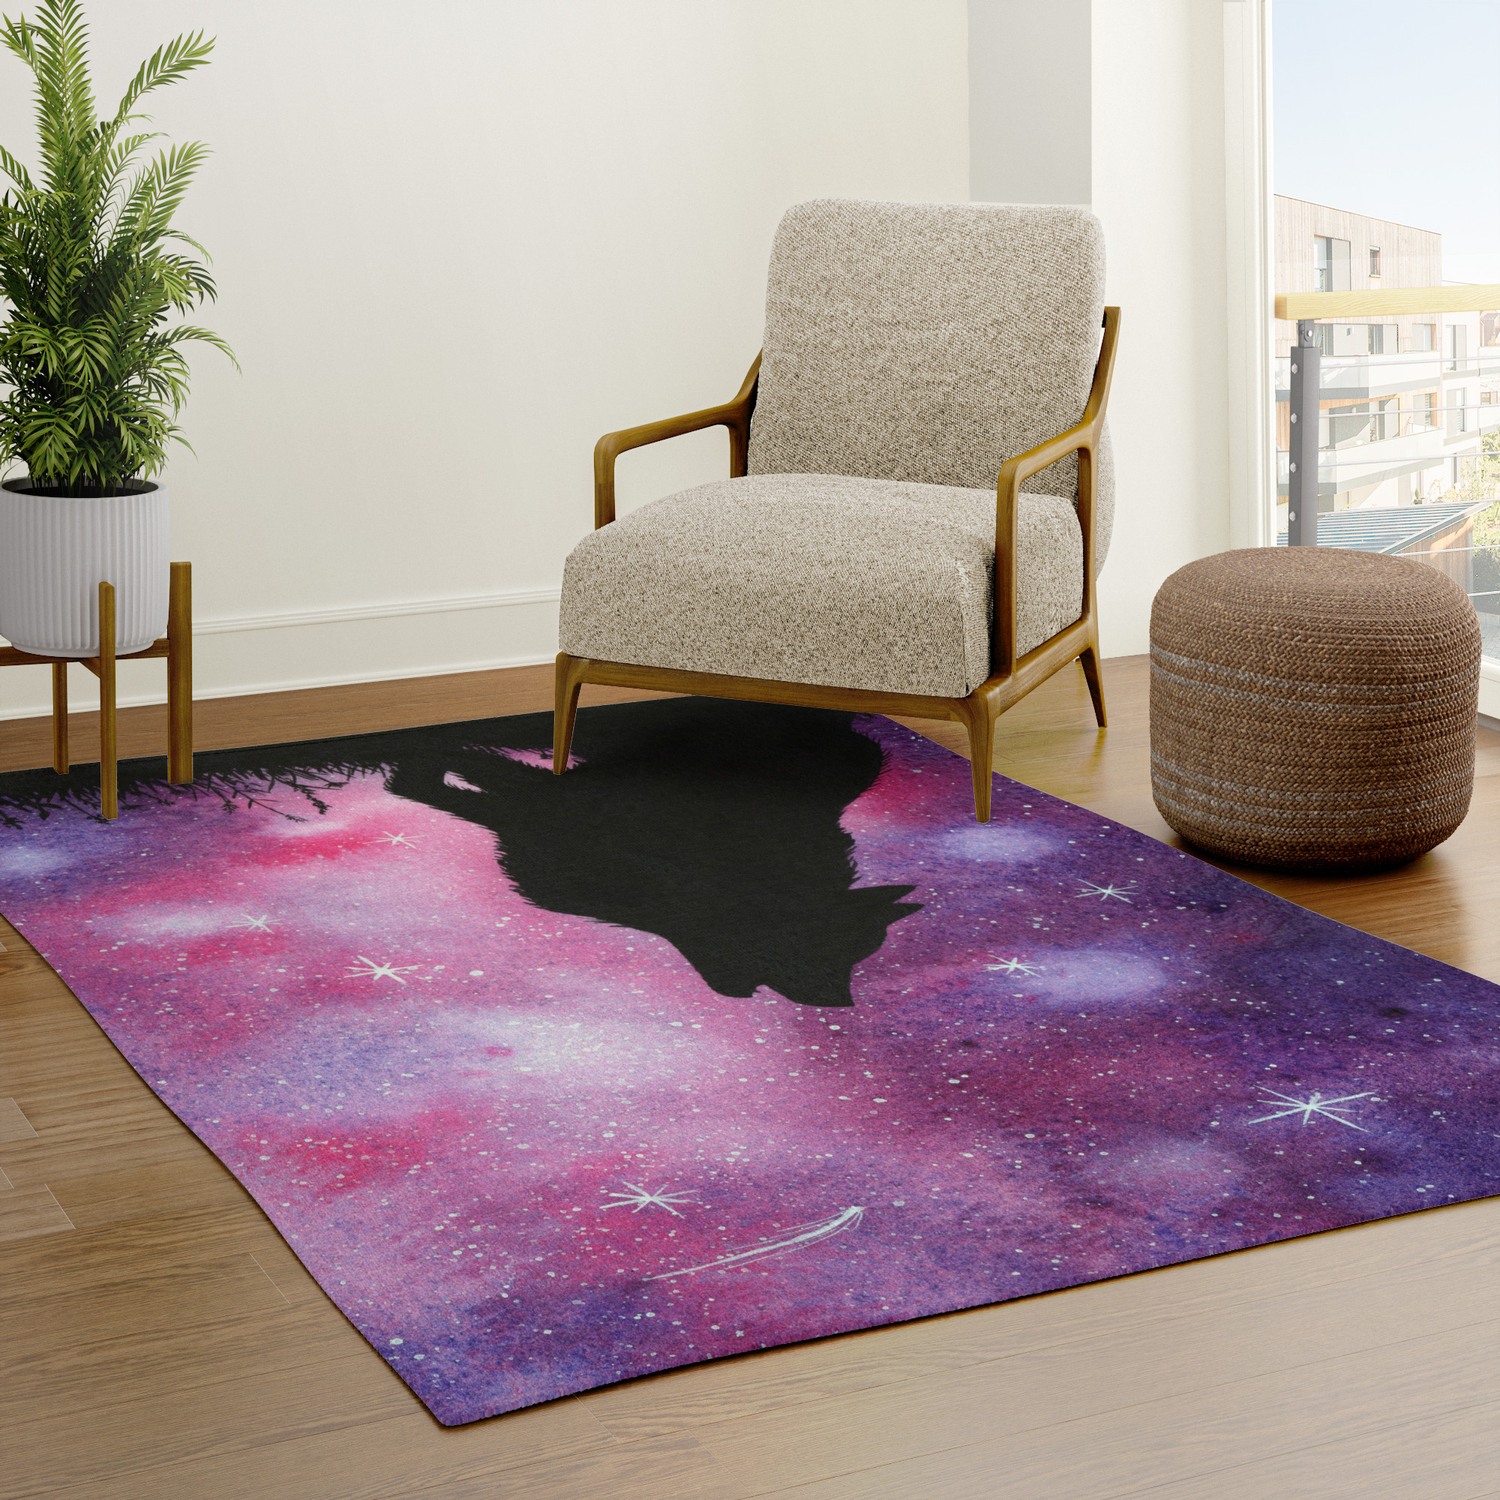 Animalworld Dog Waiting for The Owner Soft Modern Area Rug for Living Room Bedroom Kids Room Rugs 3D Print for Iving Room Bedroom Office Decor Indoor Carpet 16 X 24 Inches 